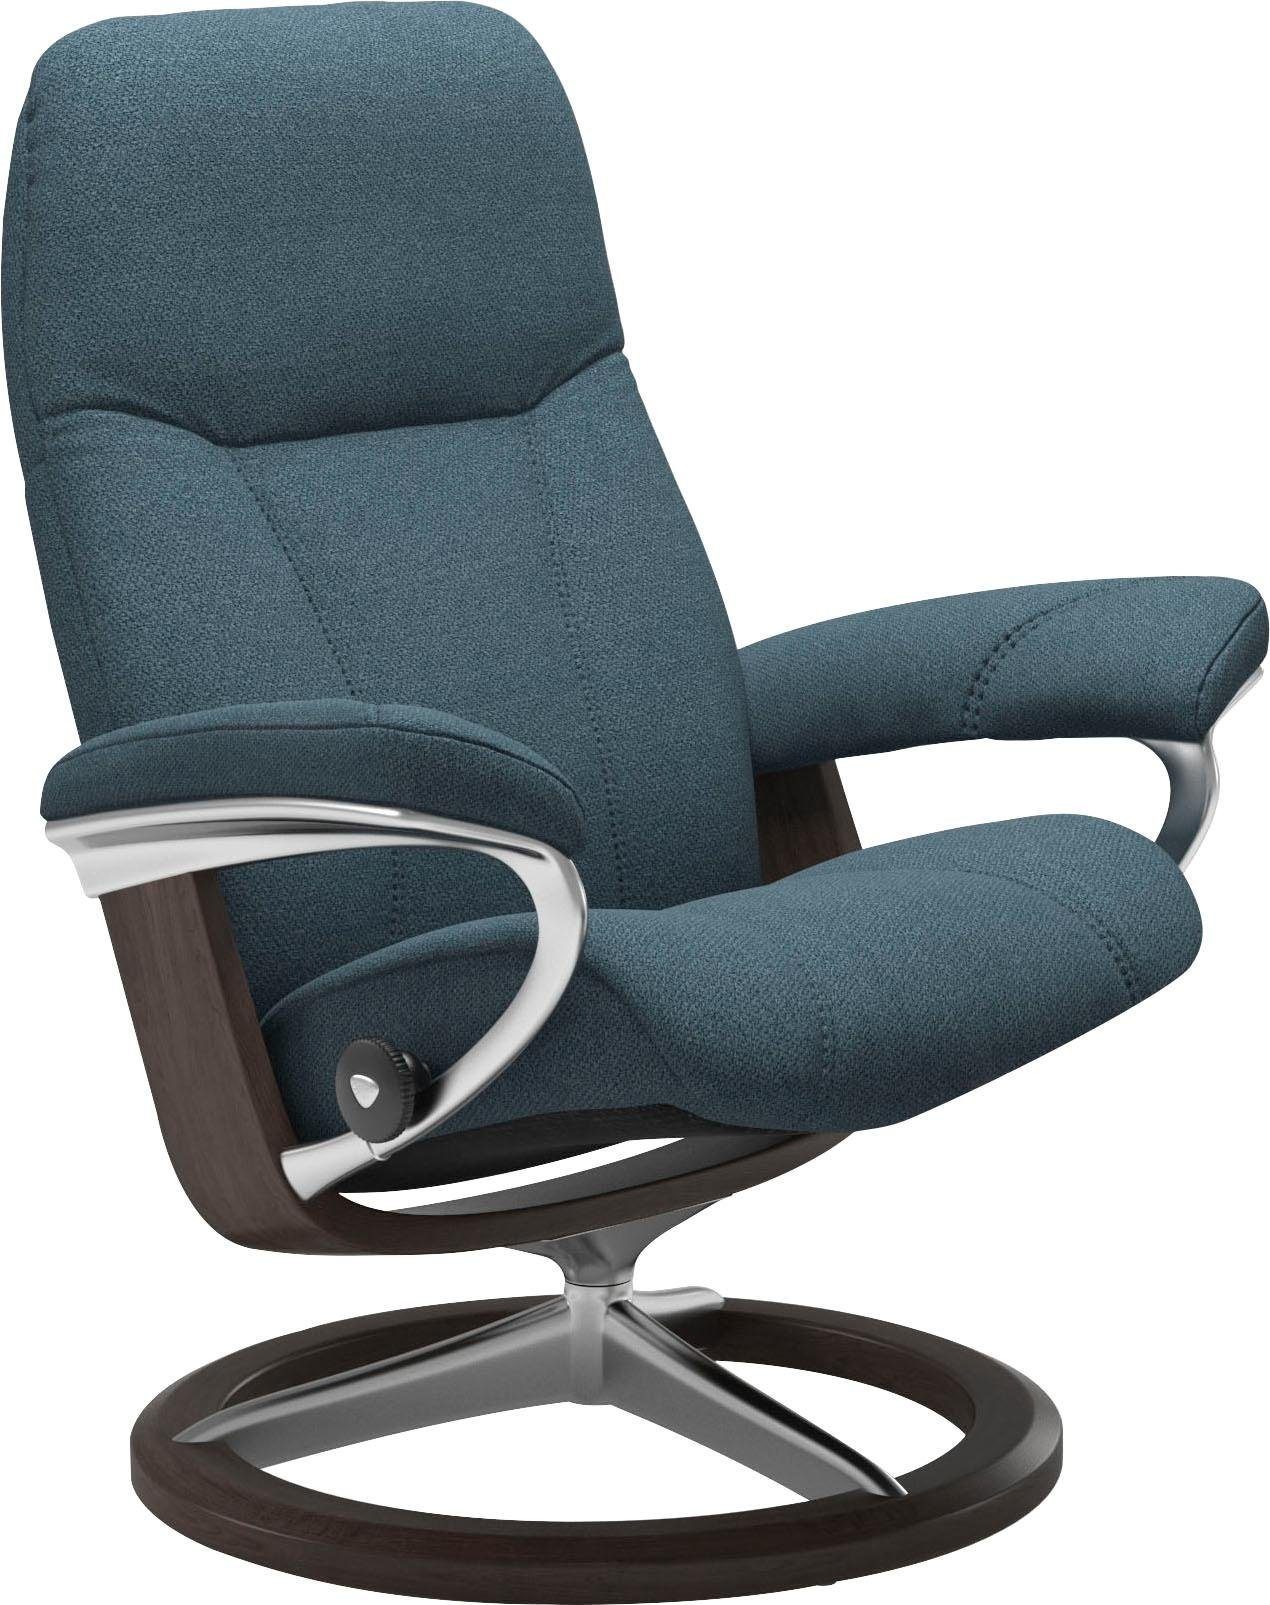 L, Relaxsessel Consul, Base, mit Wenge Größe Signature Stressless® Gestell